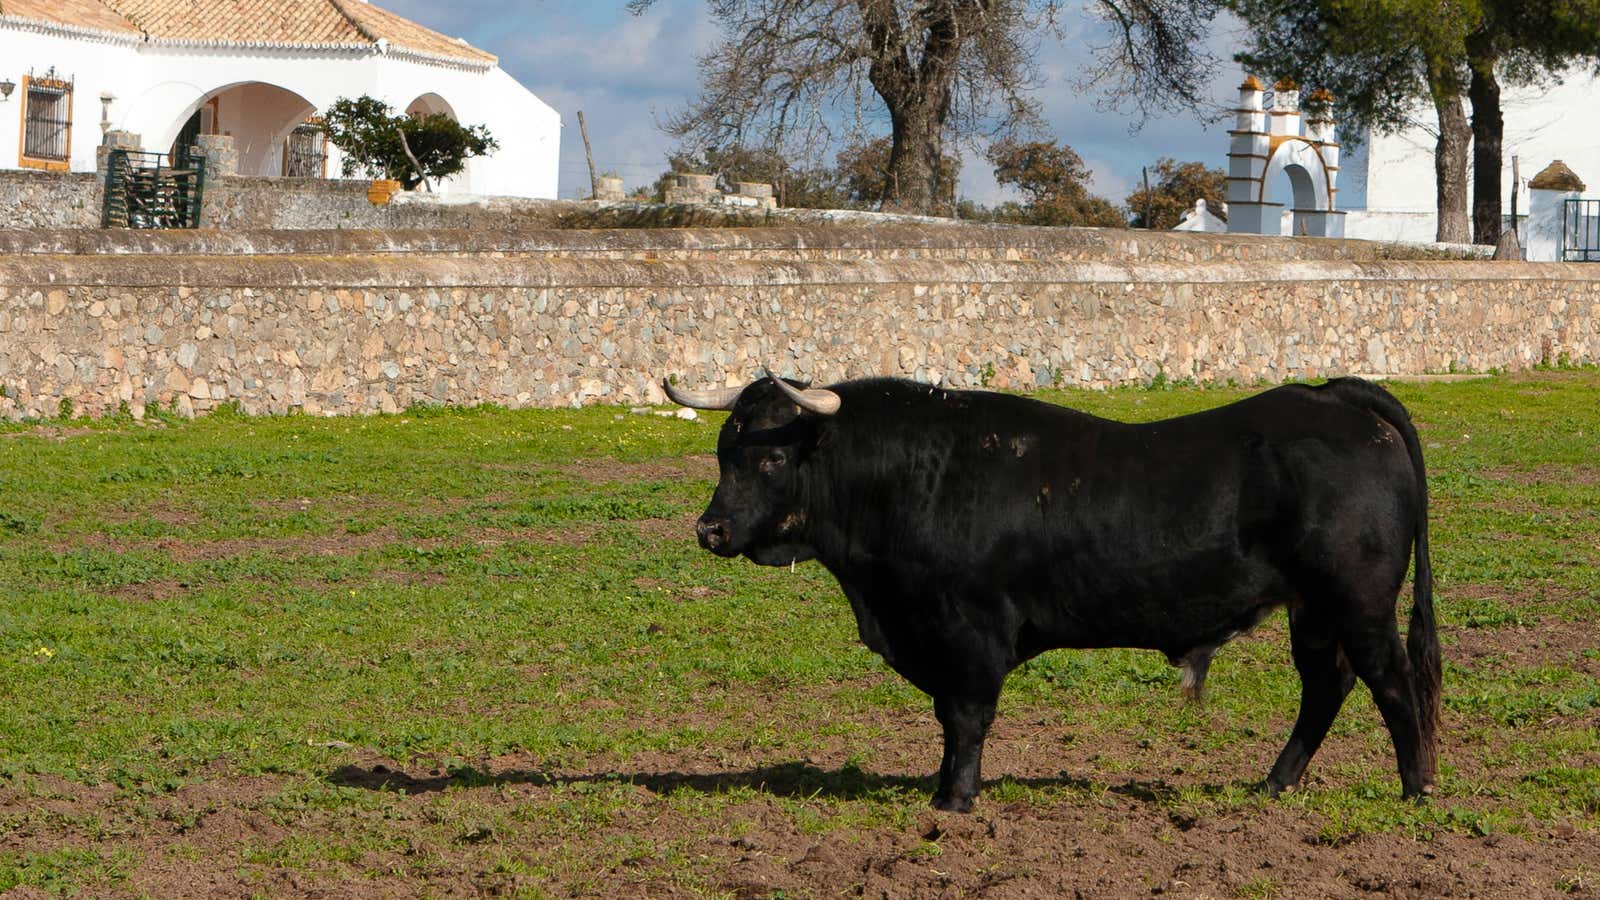 A bull roams in a ranch just outside of Seville.